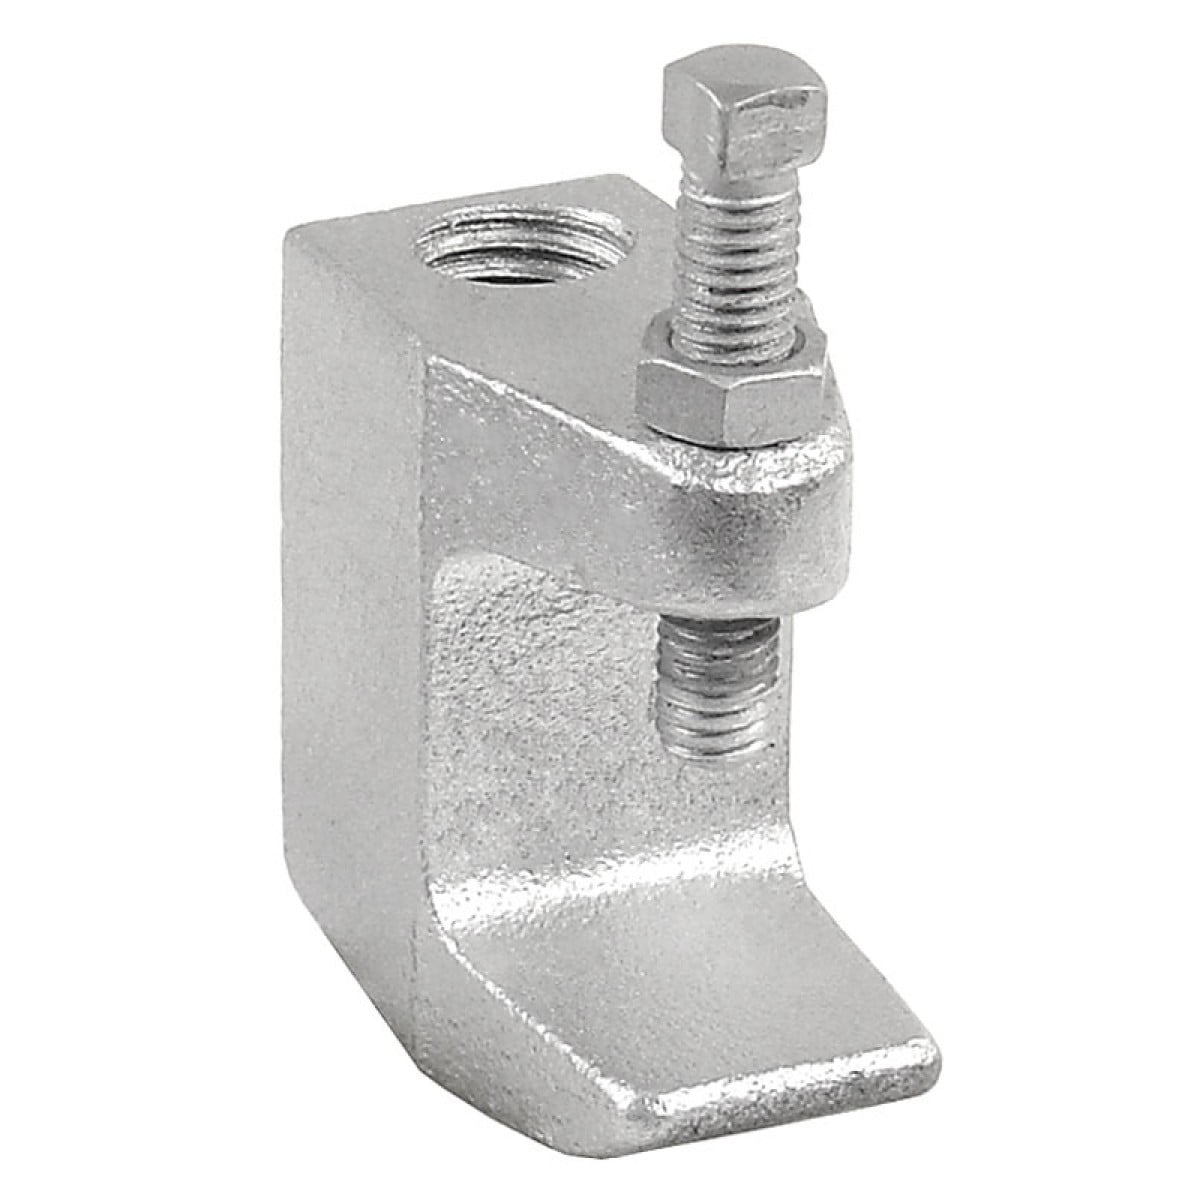 Qty 4 Steel City 215 Galvanized Malleable Iron 3/8" Beam Clamp